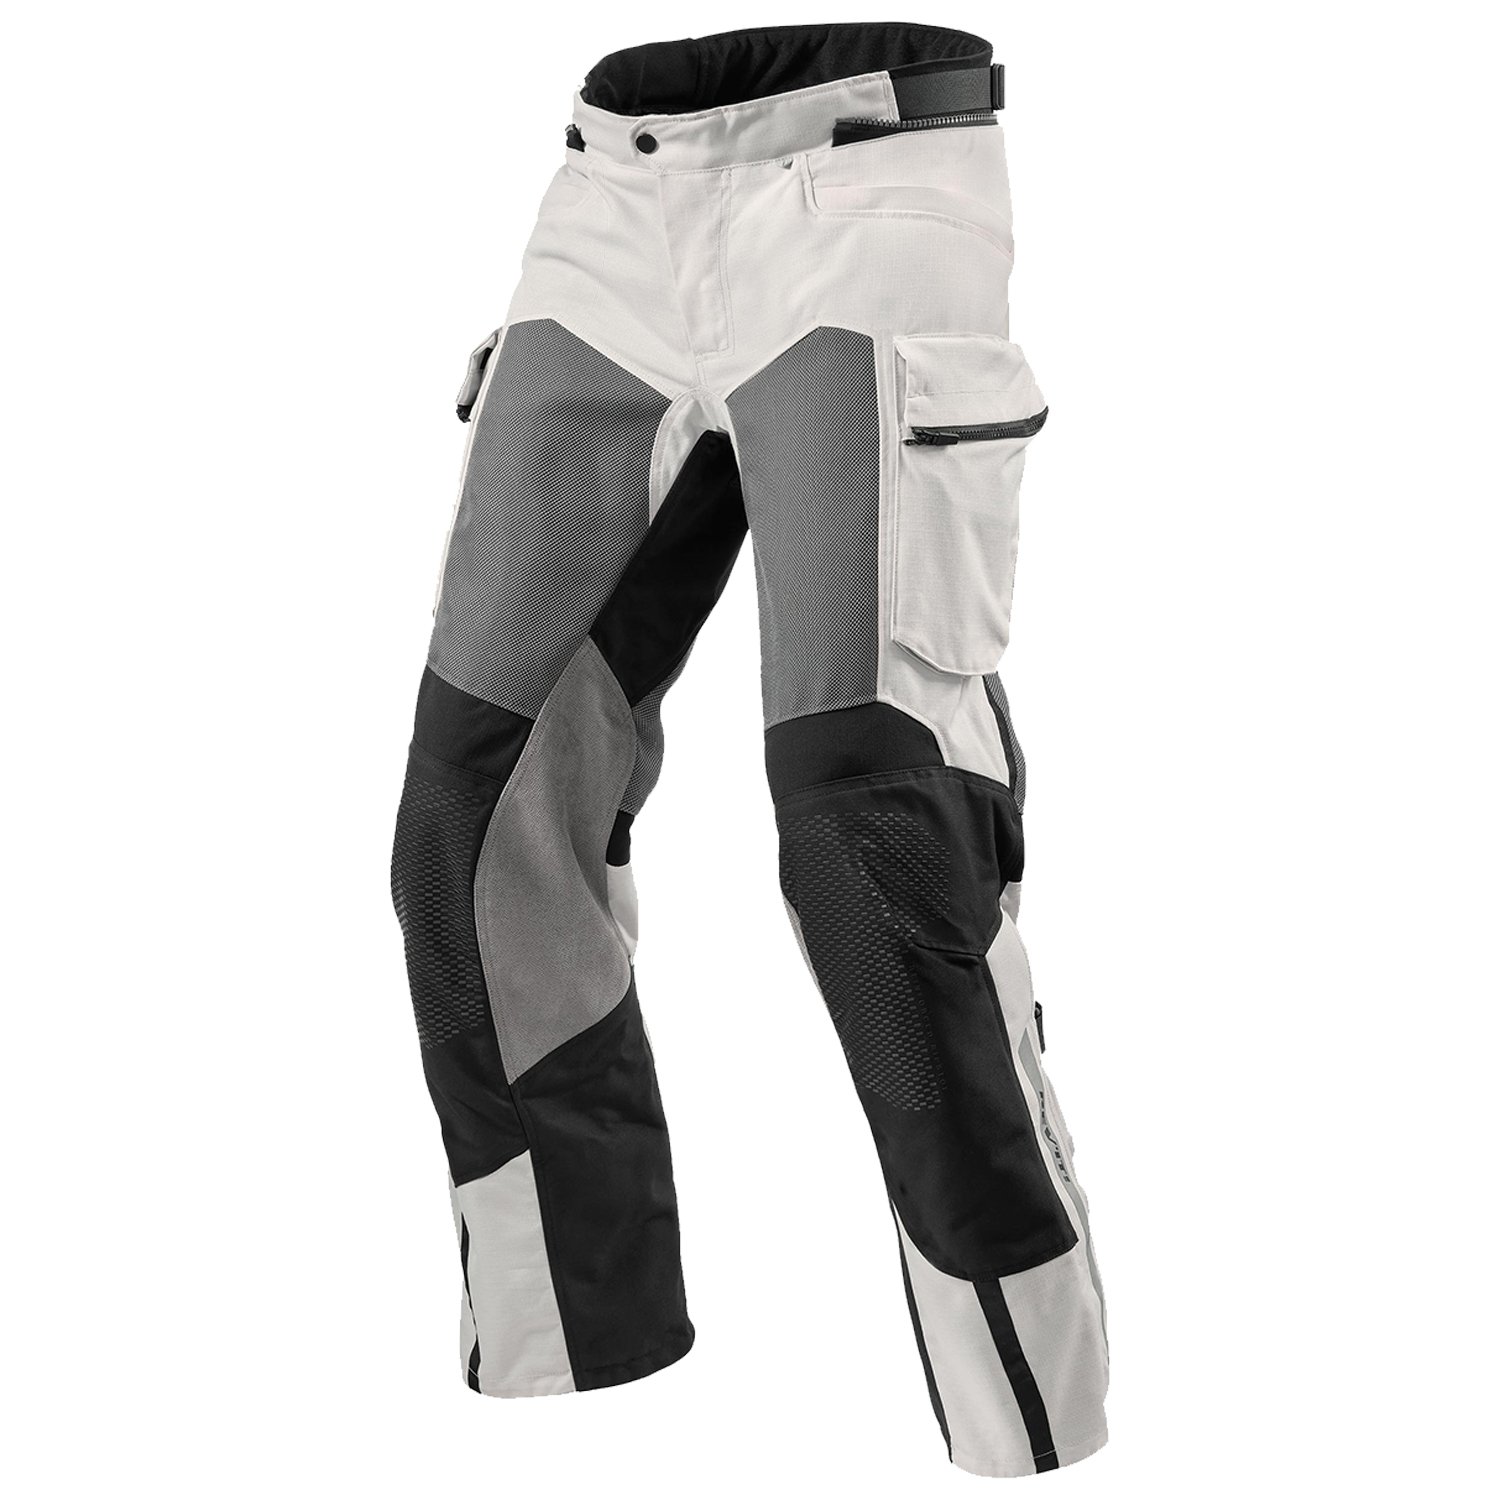 Image of REV'IT! Cayenne 2 Silver Motorcycle Pants Talla M